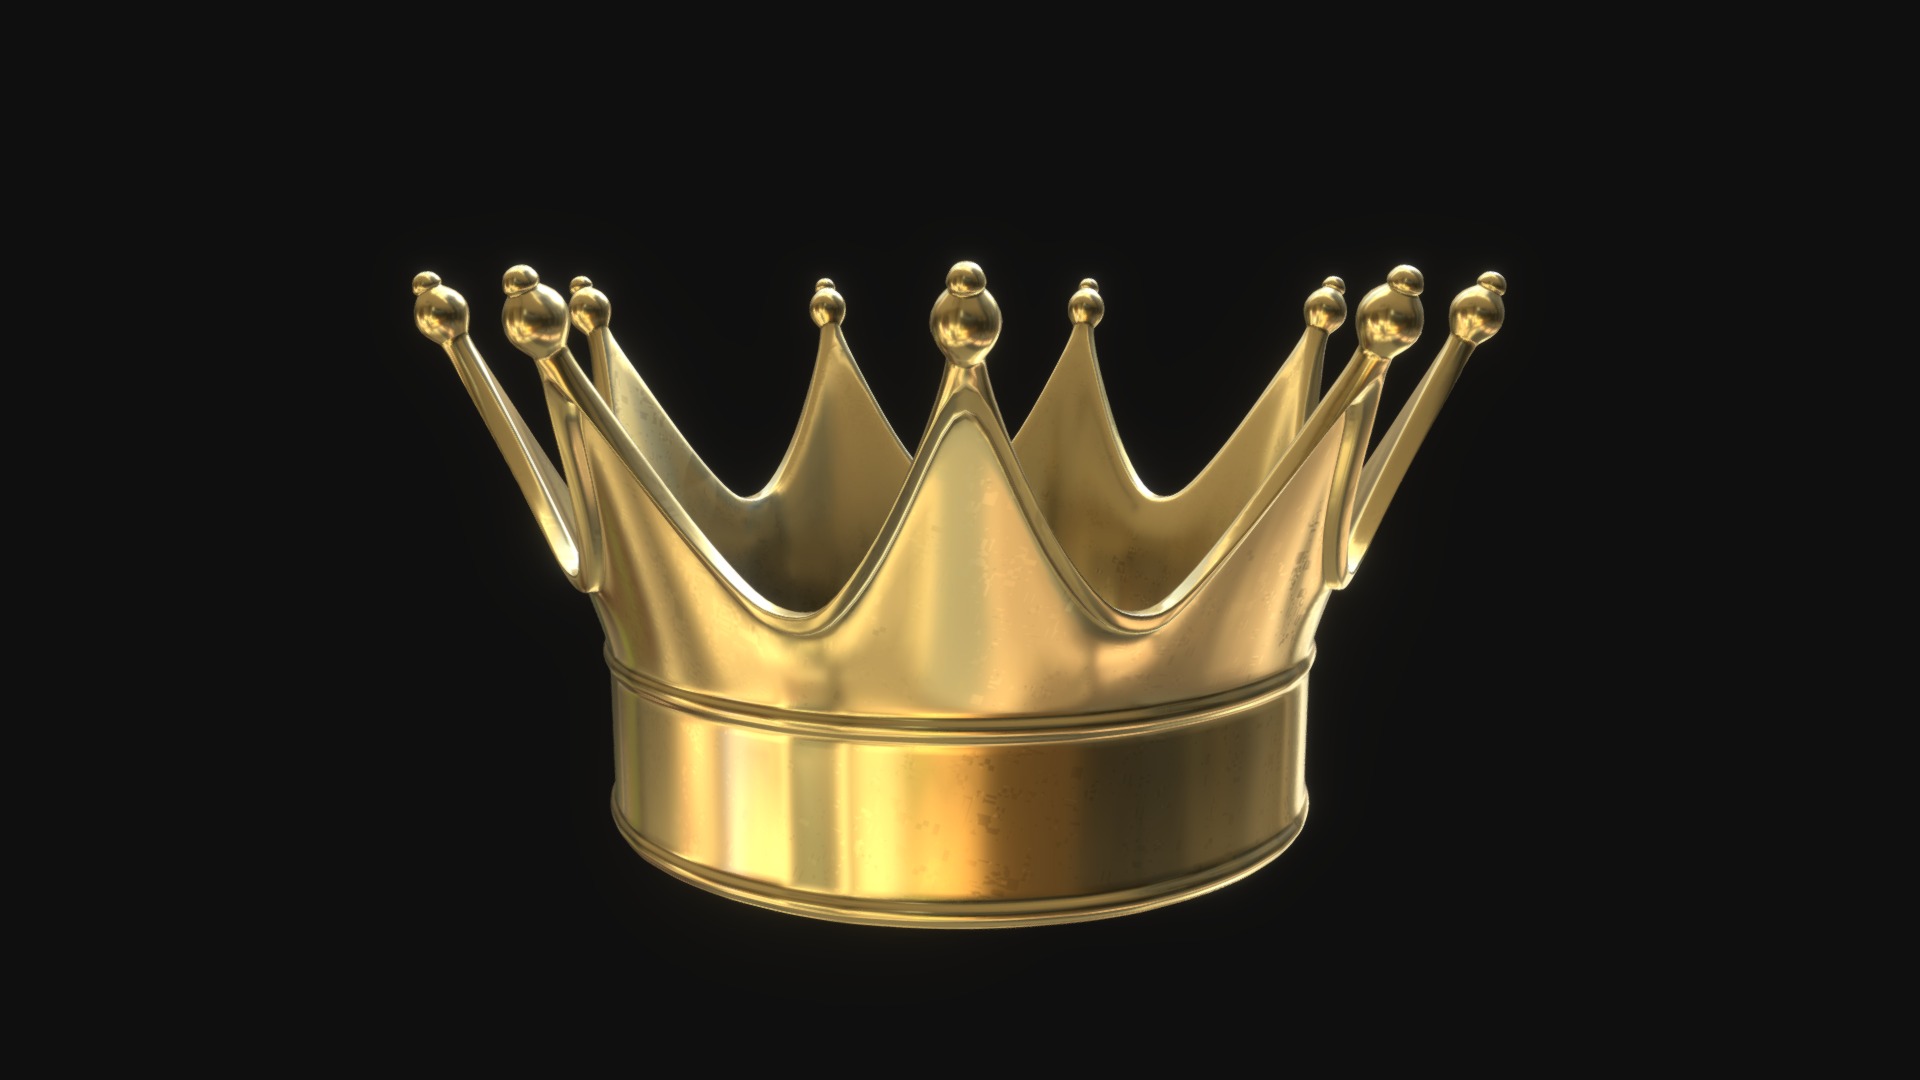 3D model Gold crown 1 - This is a 3D model of the Gold crown 1. The 3D model is about a gold and glass bowl.